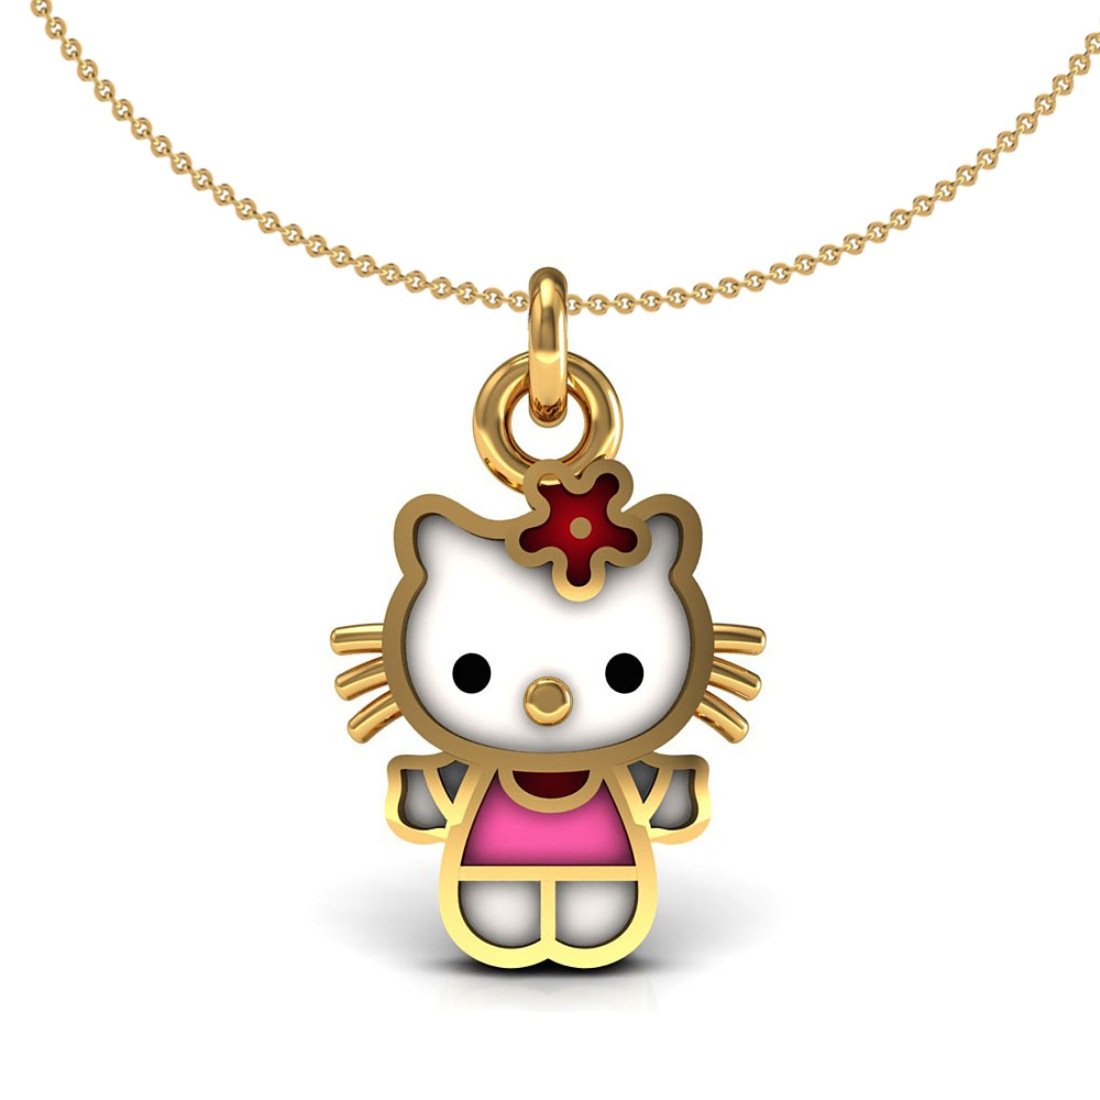 Solid 18k gold enamel teddy kids pendant with chain